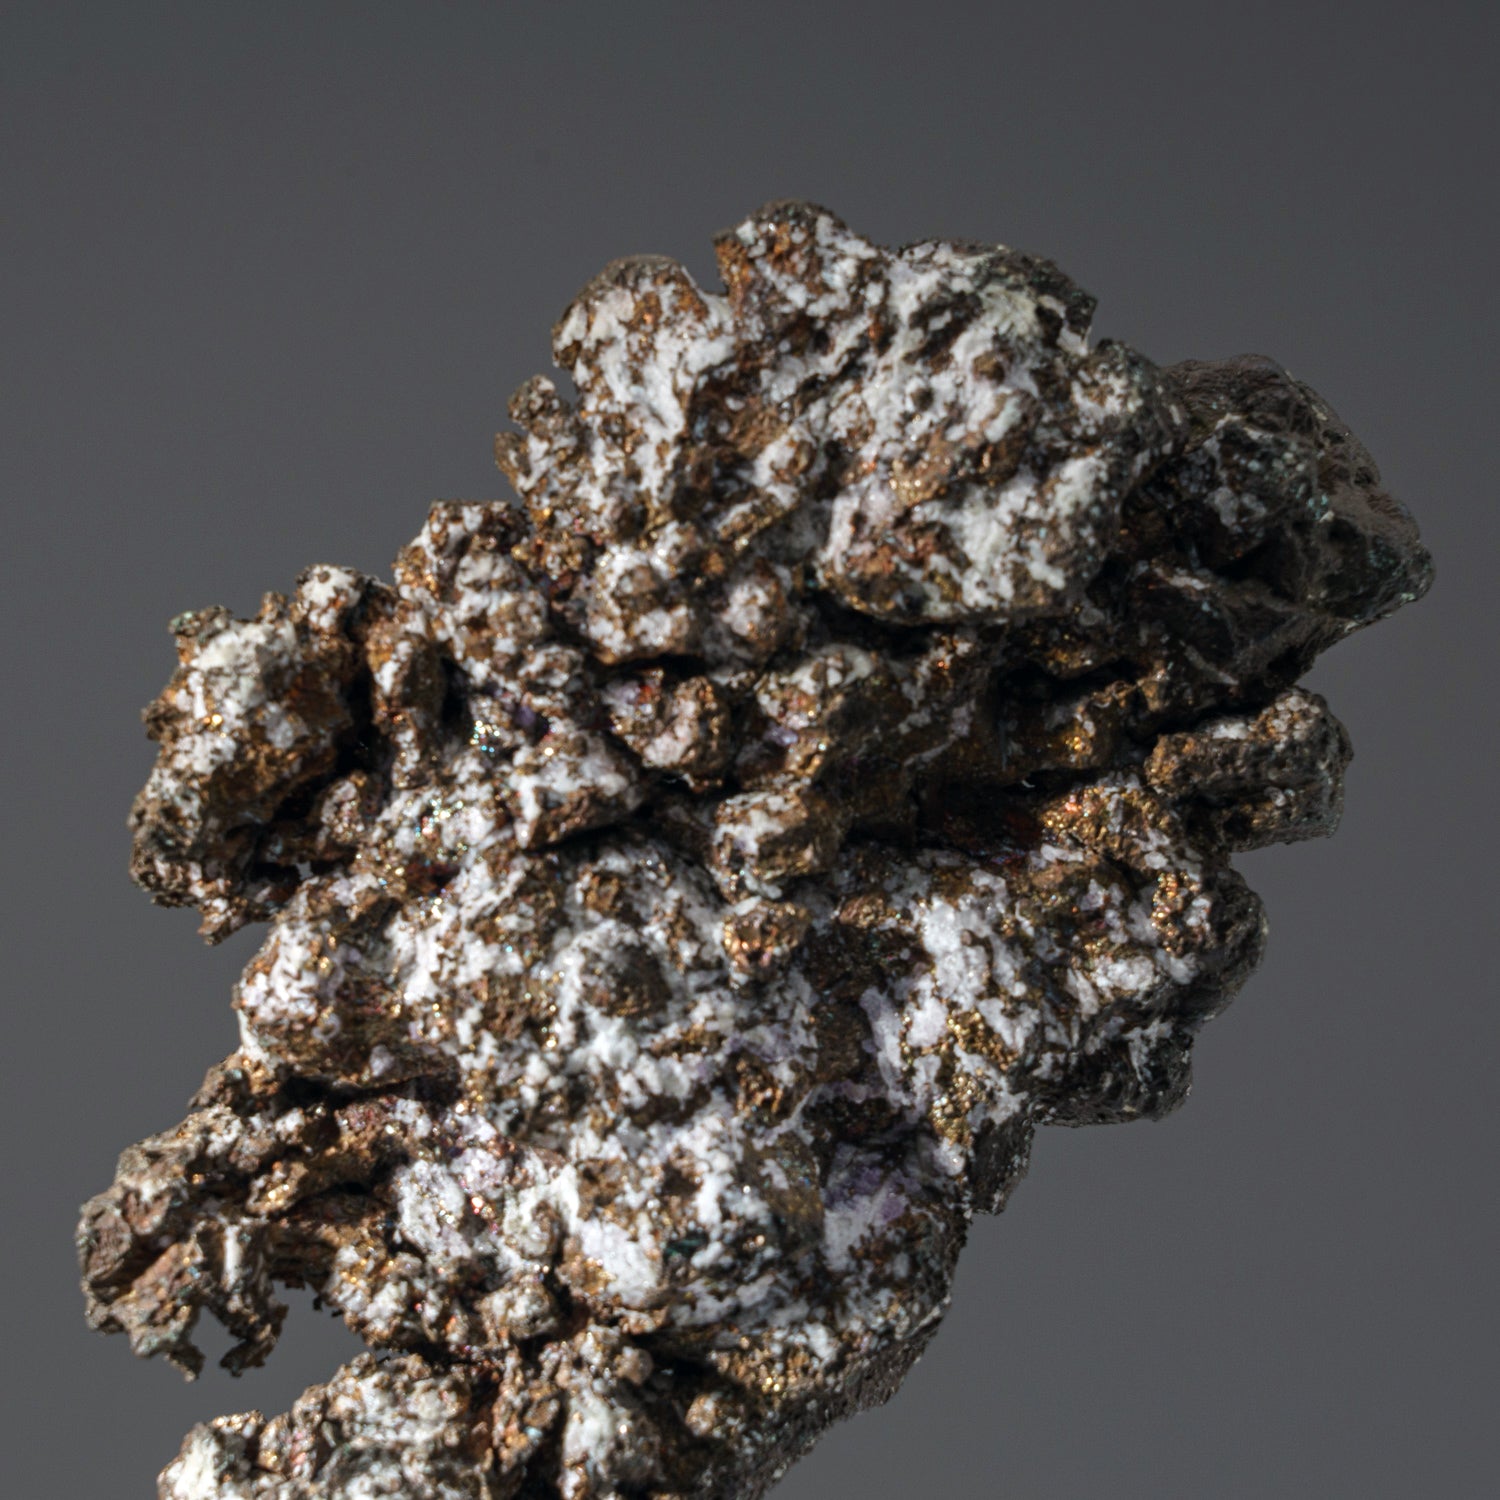 Crystallized Native Copper from Chimney Rock Quarry, Bound Brook, Somerset County, New Jersey